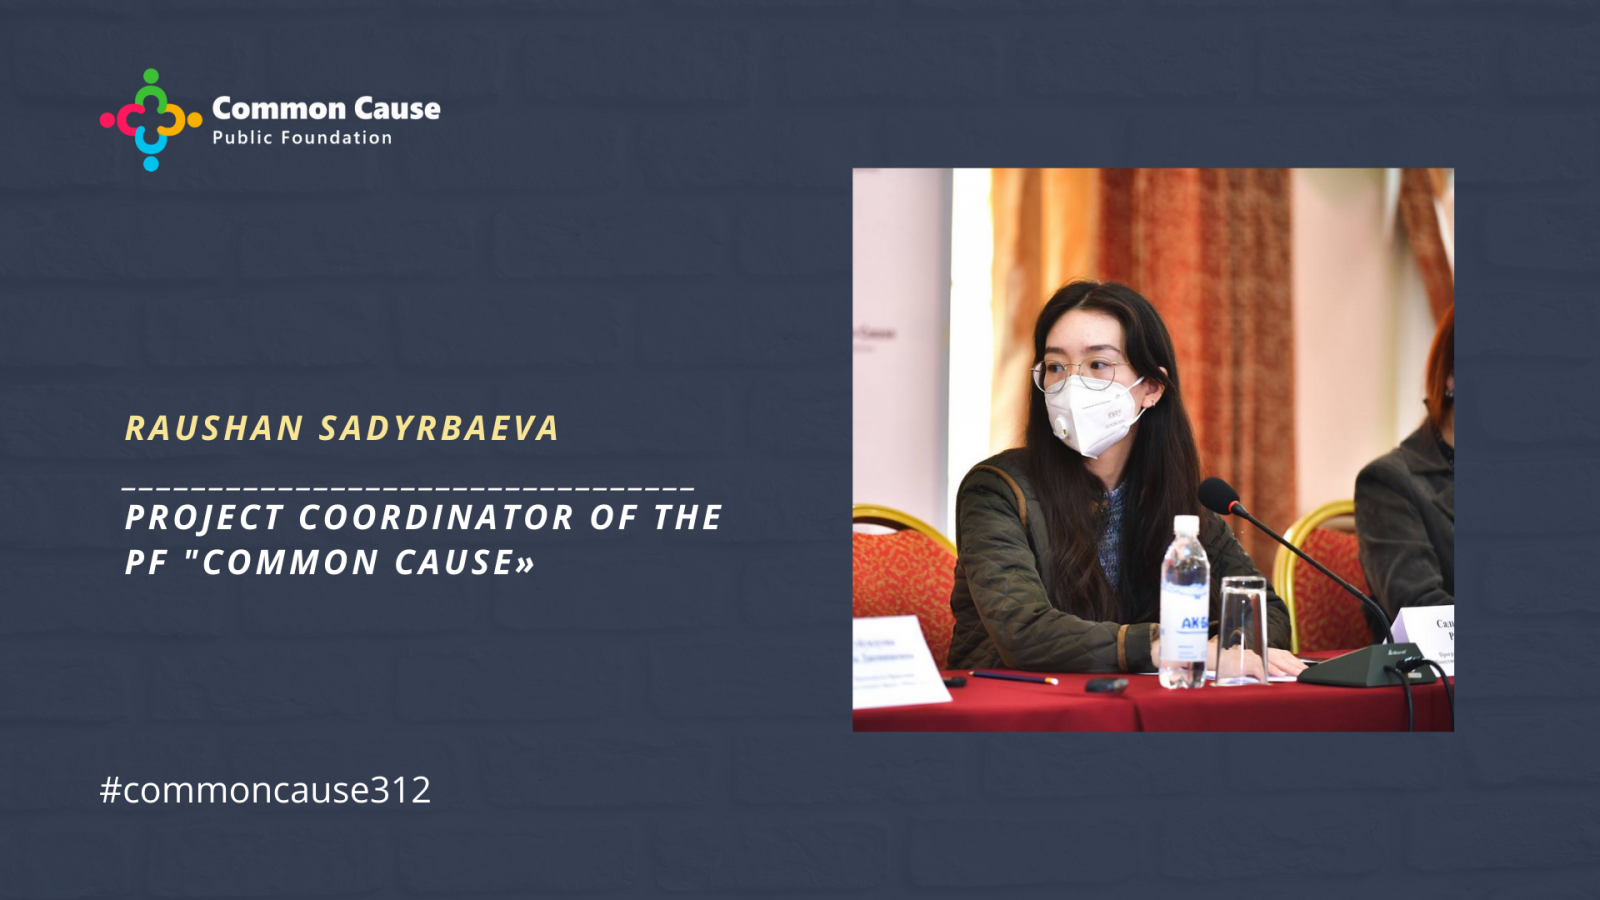 On January 11, at 13:00, the Public Foundation "Common Cause" will hold a press conference